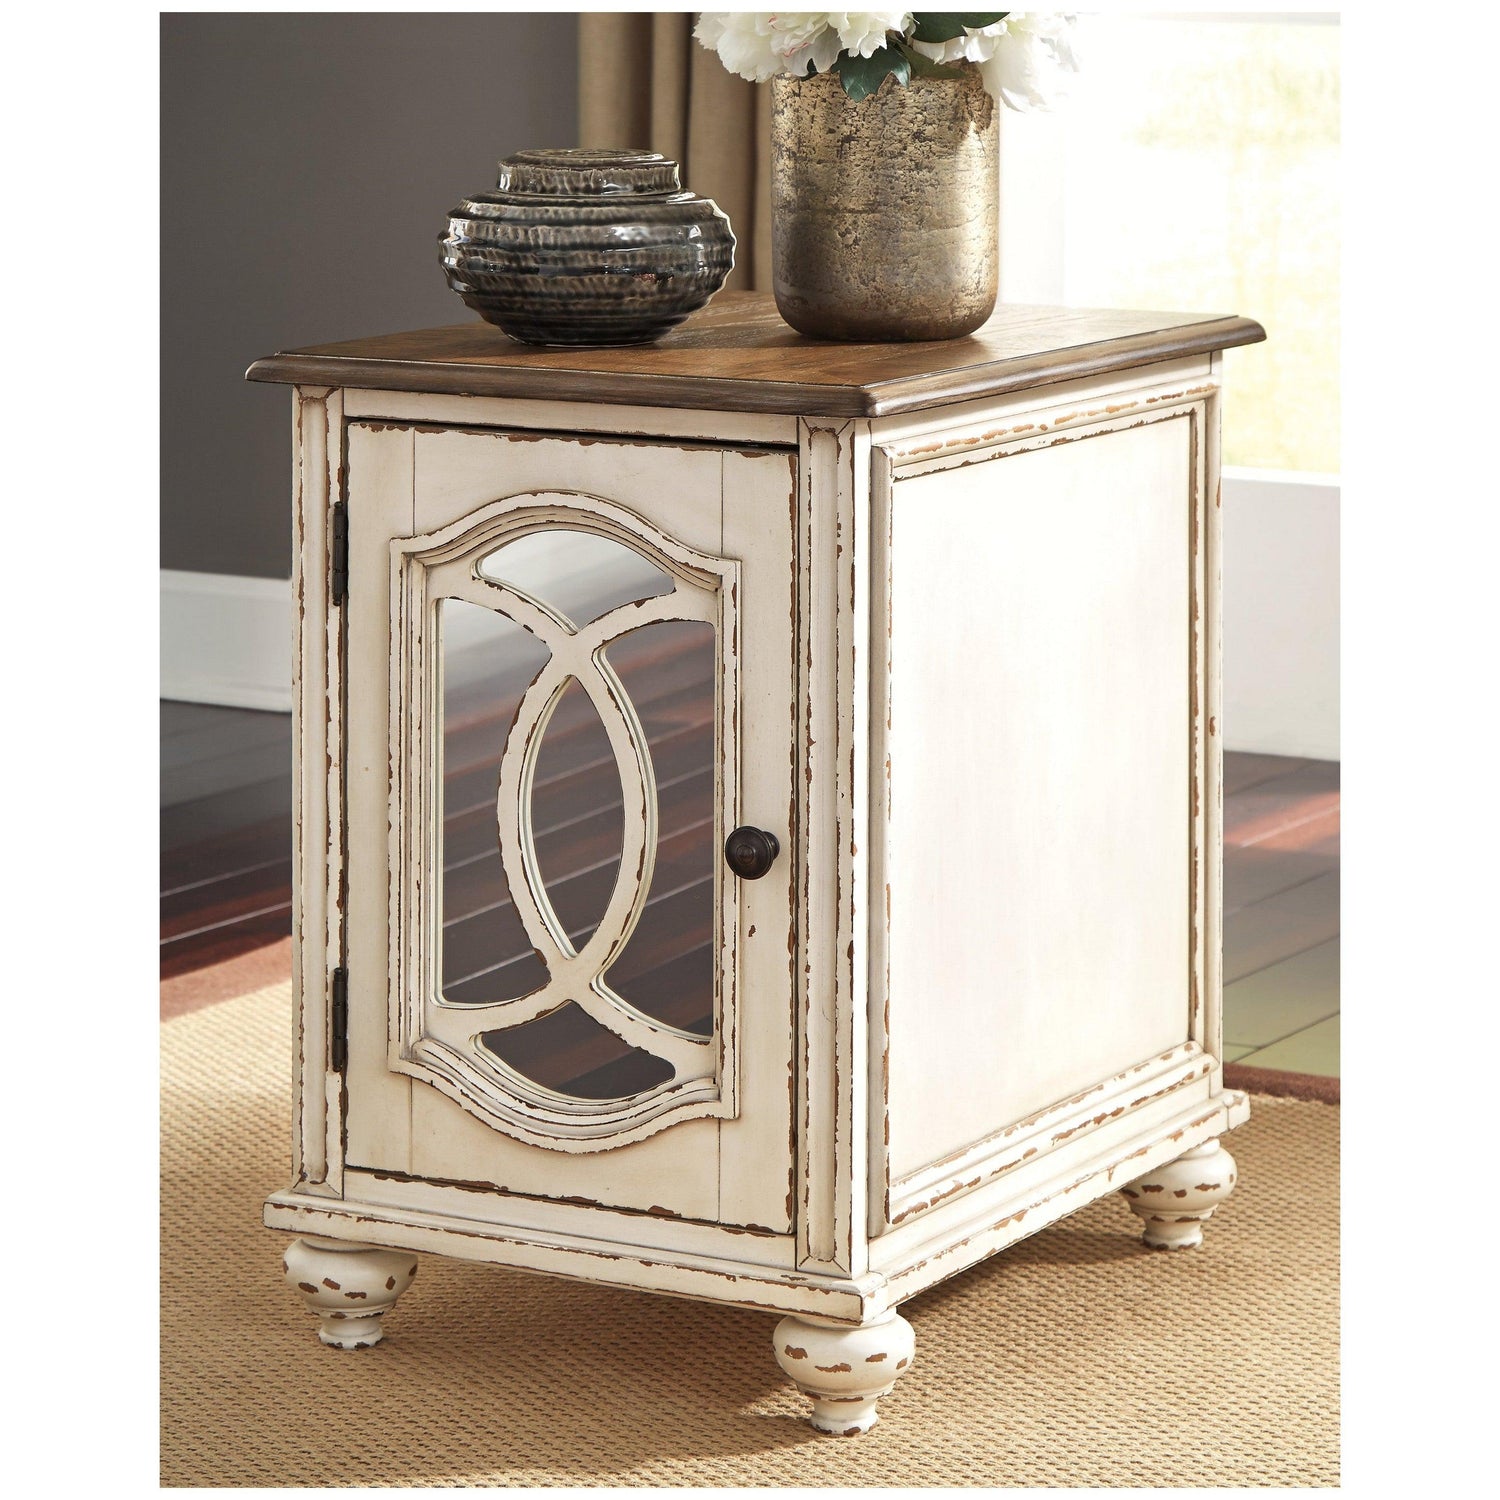 Realyn Chairside End Table Ash-T743-7